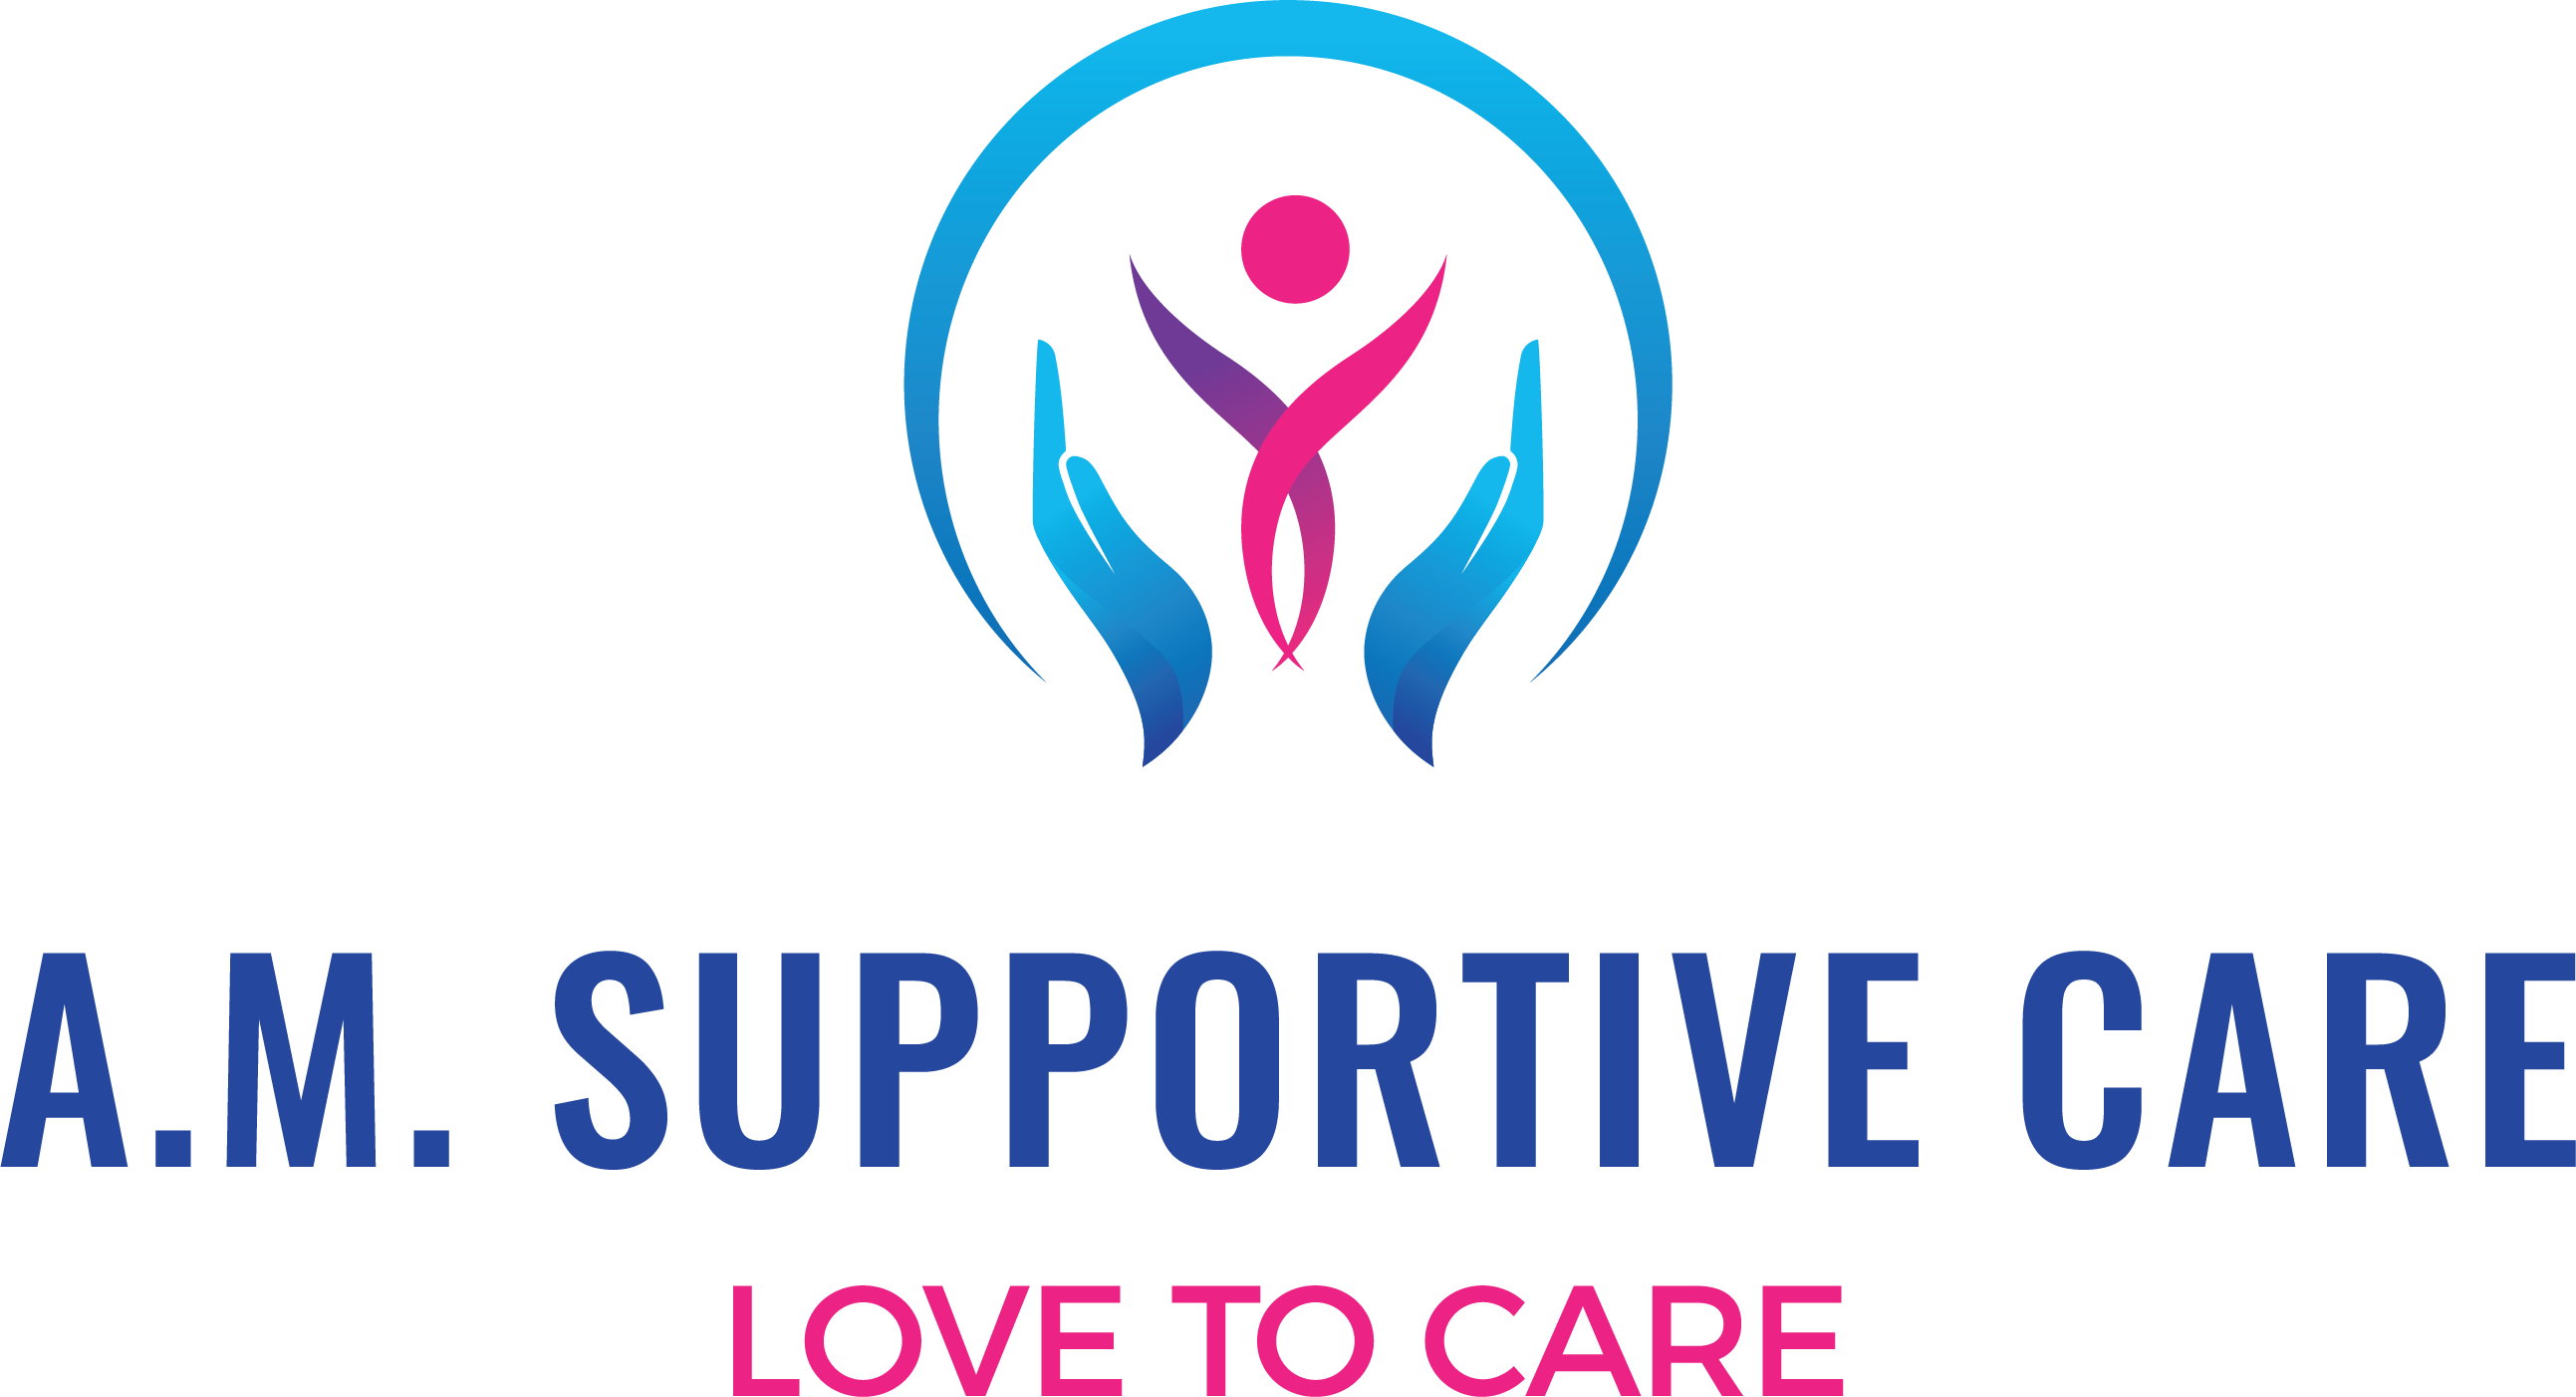 A.M. Supportive Care logo